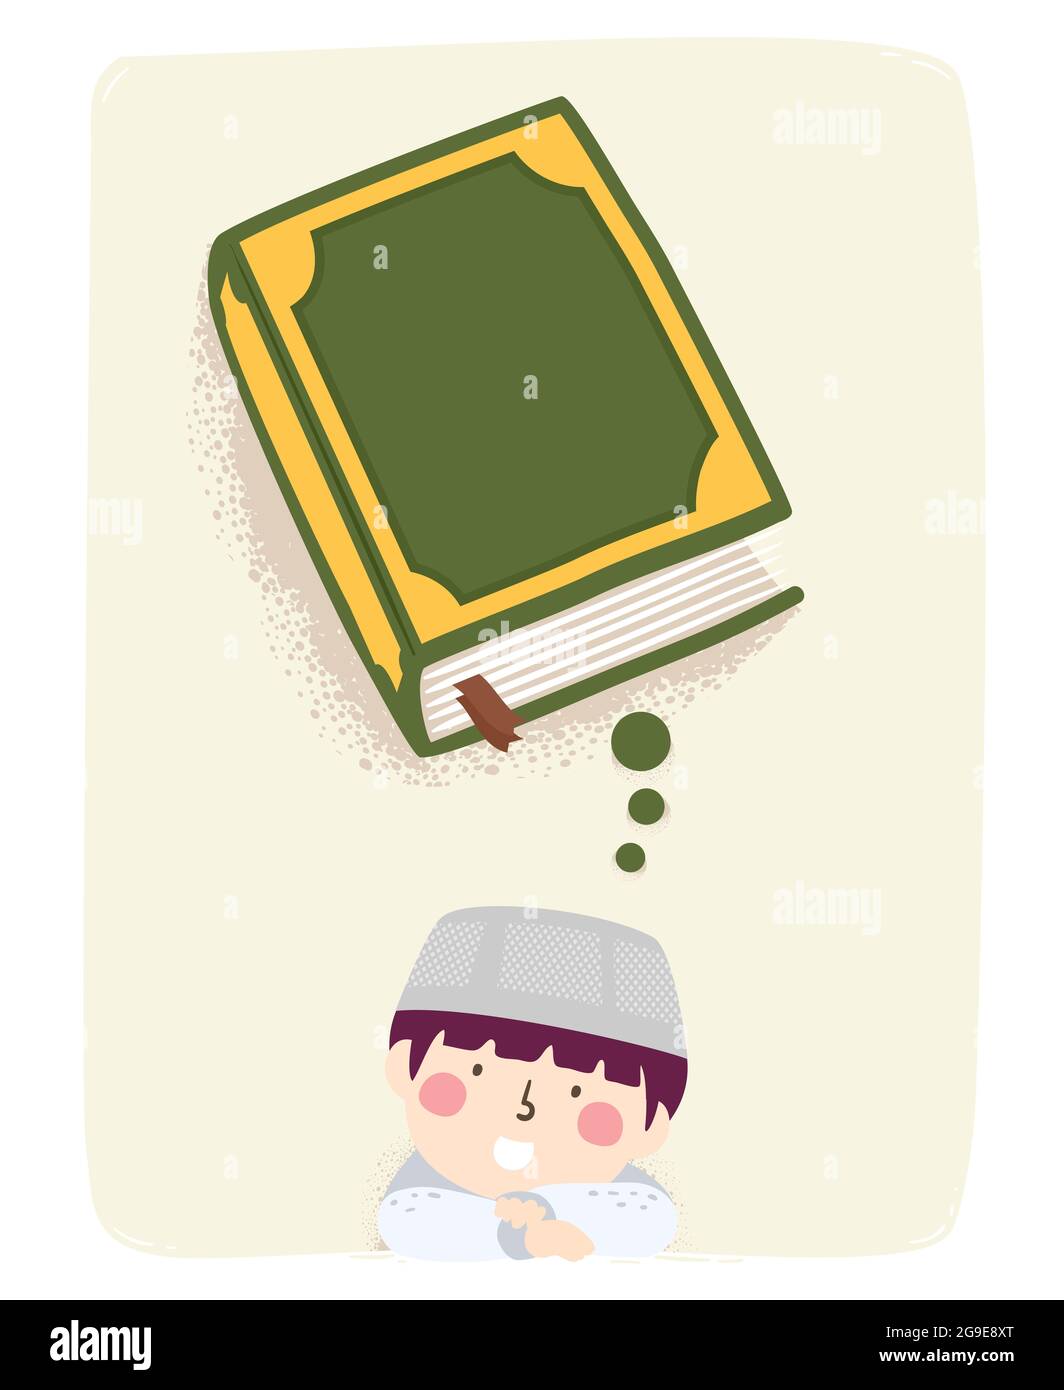 Illustration of a Kid Boy Muslim Thinking About the Quran Stock Photo